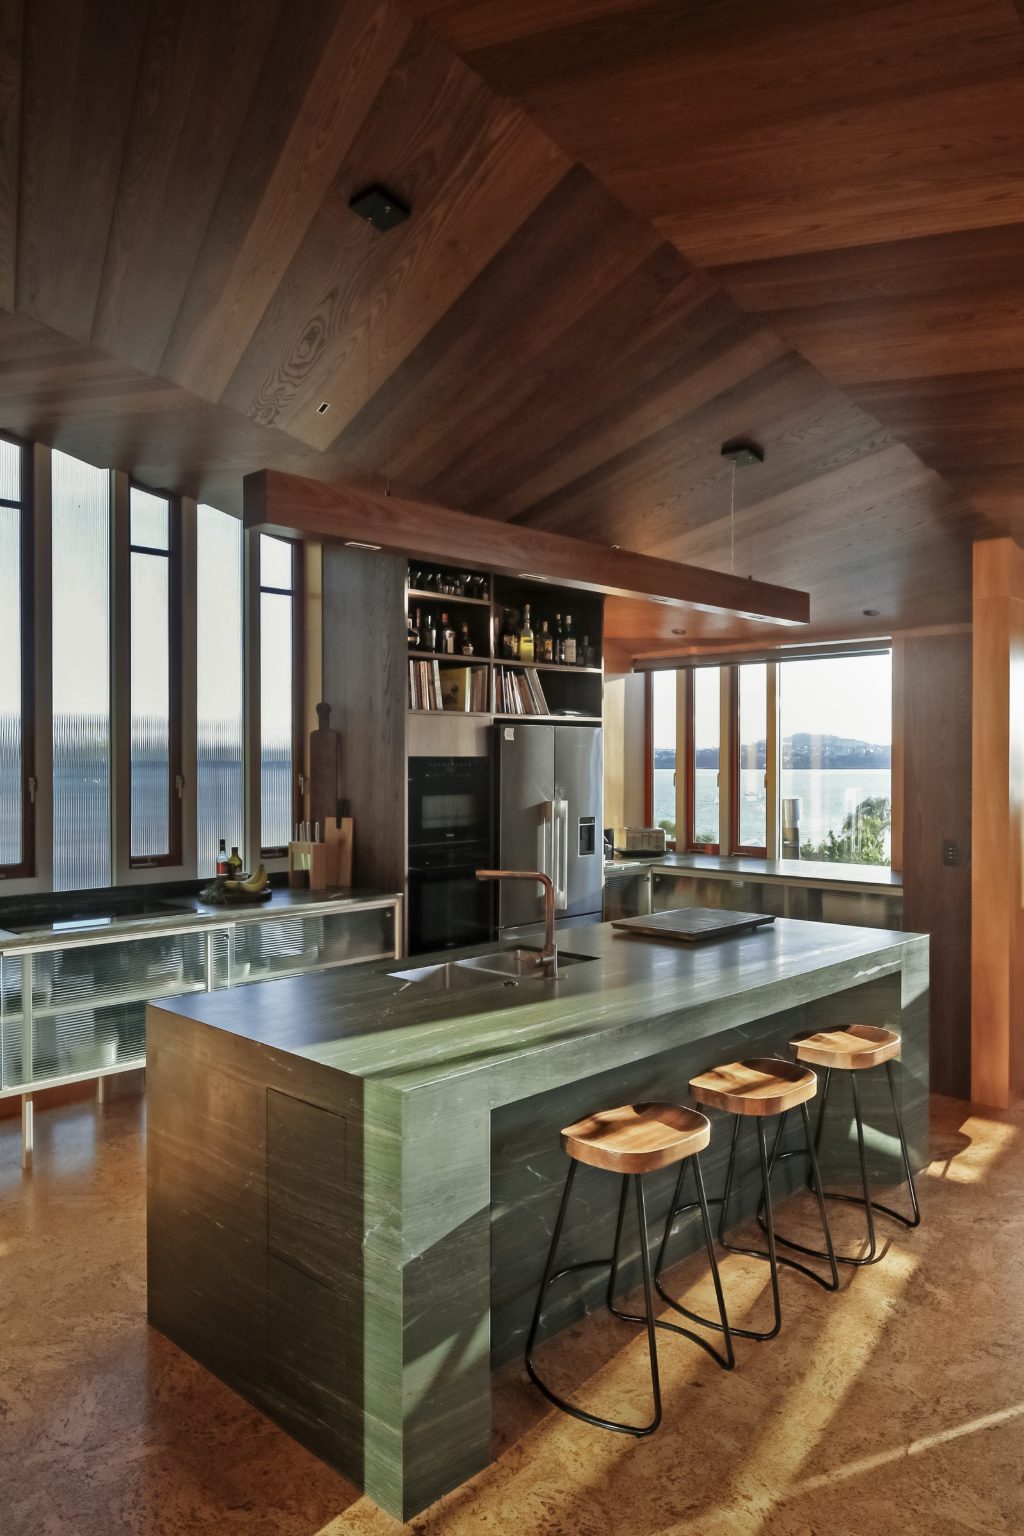 Green kitchen island with three stools. High wooden roof and views of Auckland harbour.